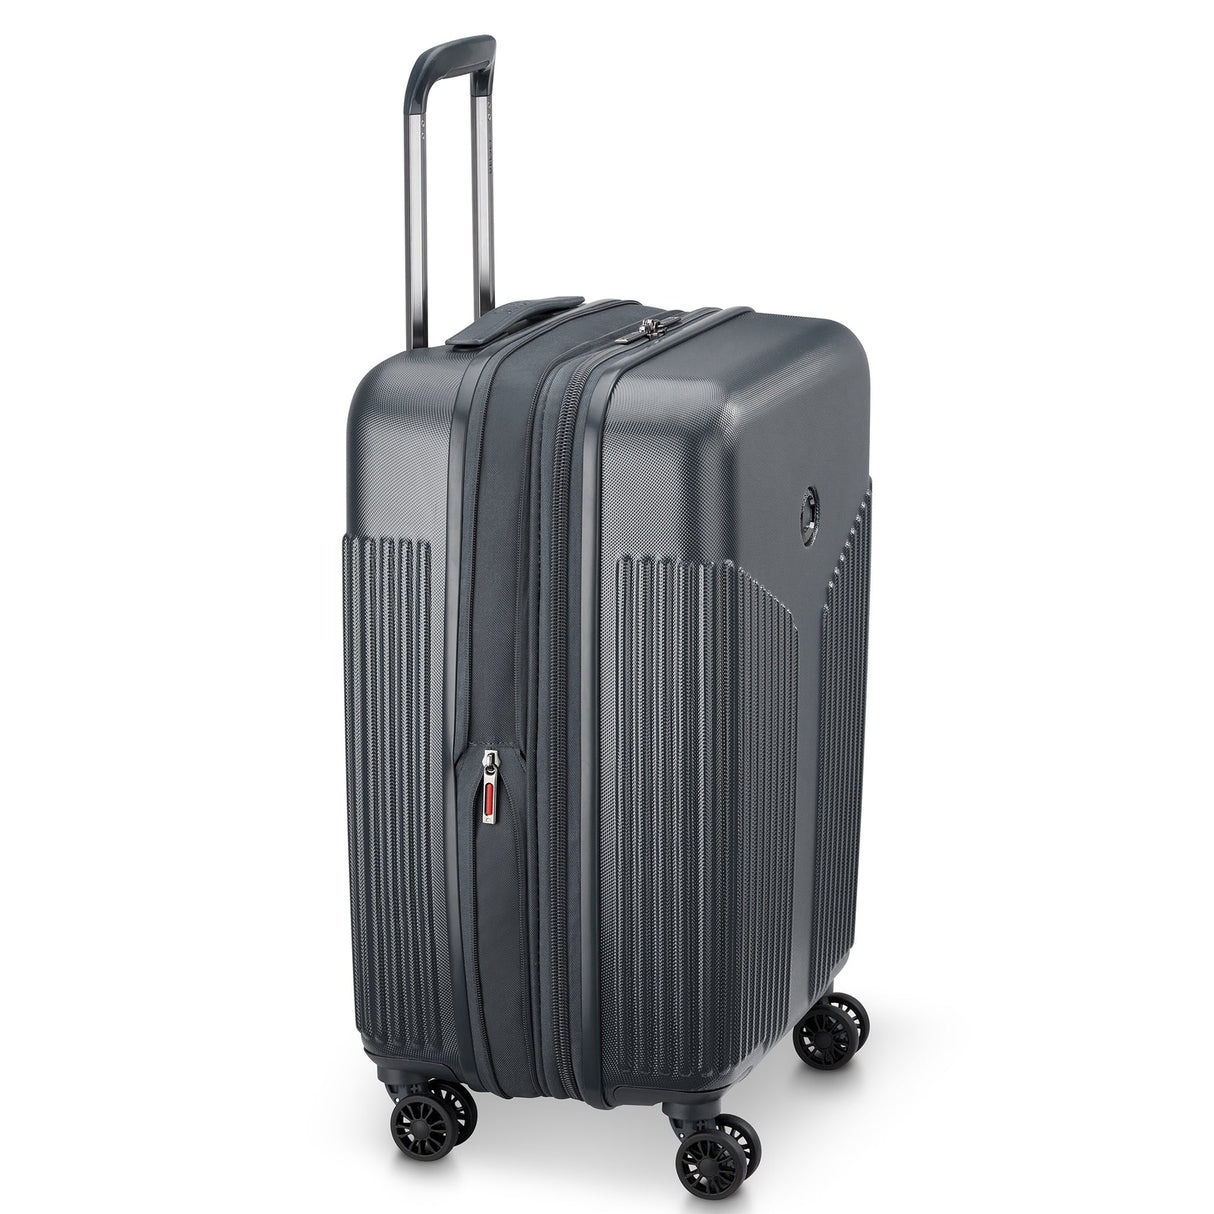 Delsey Comete 3.0 Carry-On Expandable Spinner , , delsey-comete-3.0-40387980501SI-12_1800x1800_0a165033-4dc7-4bb1-b1a4-018a094a87d8